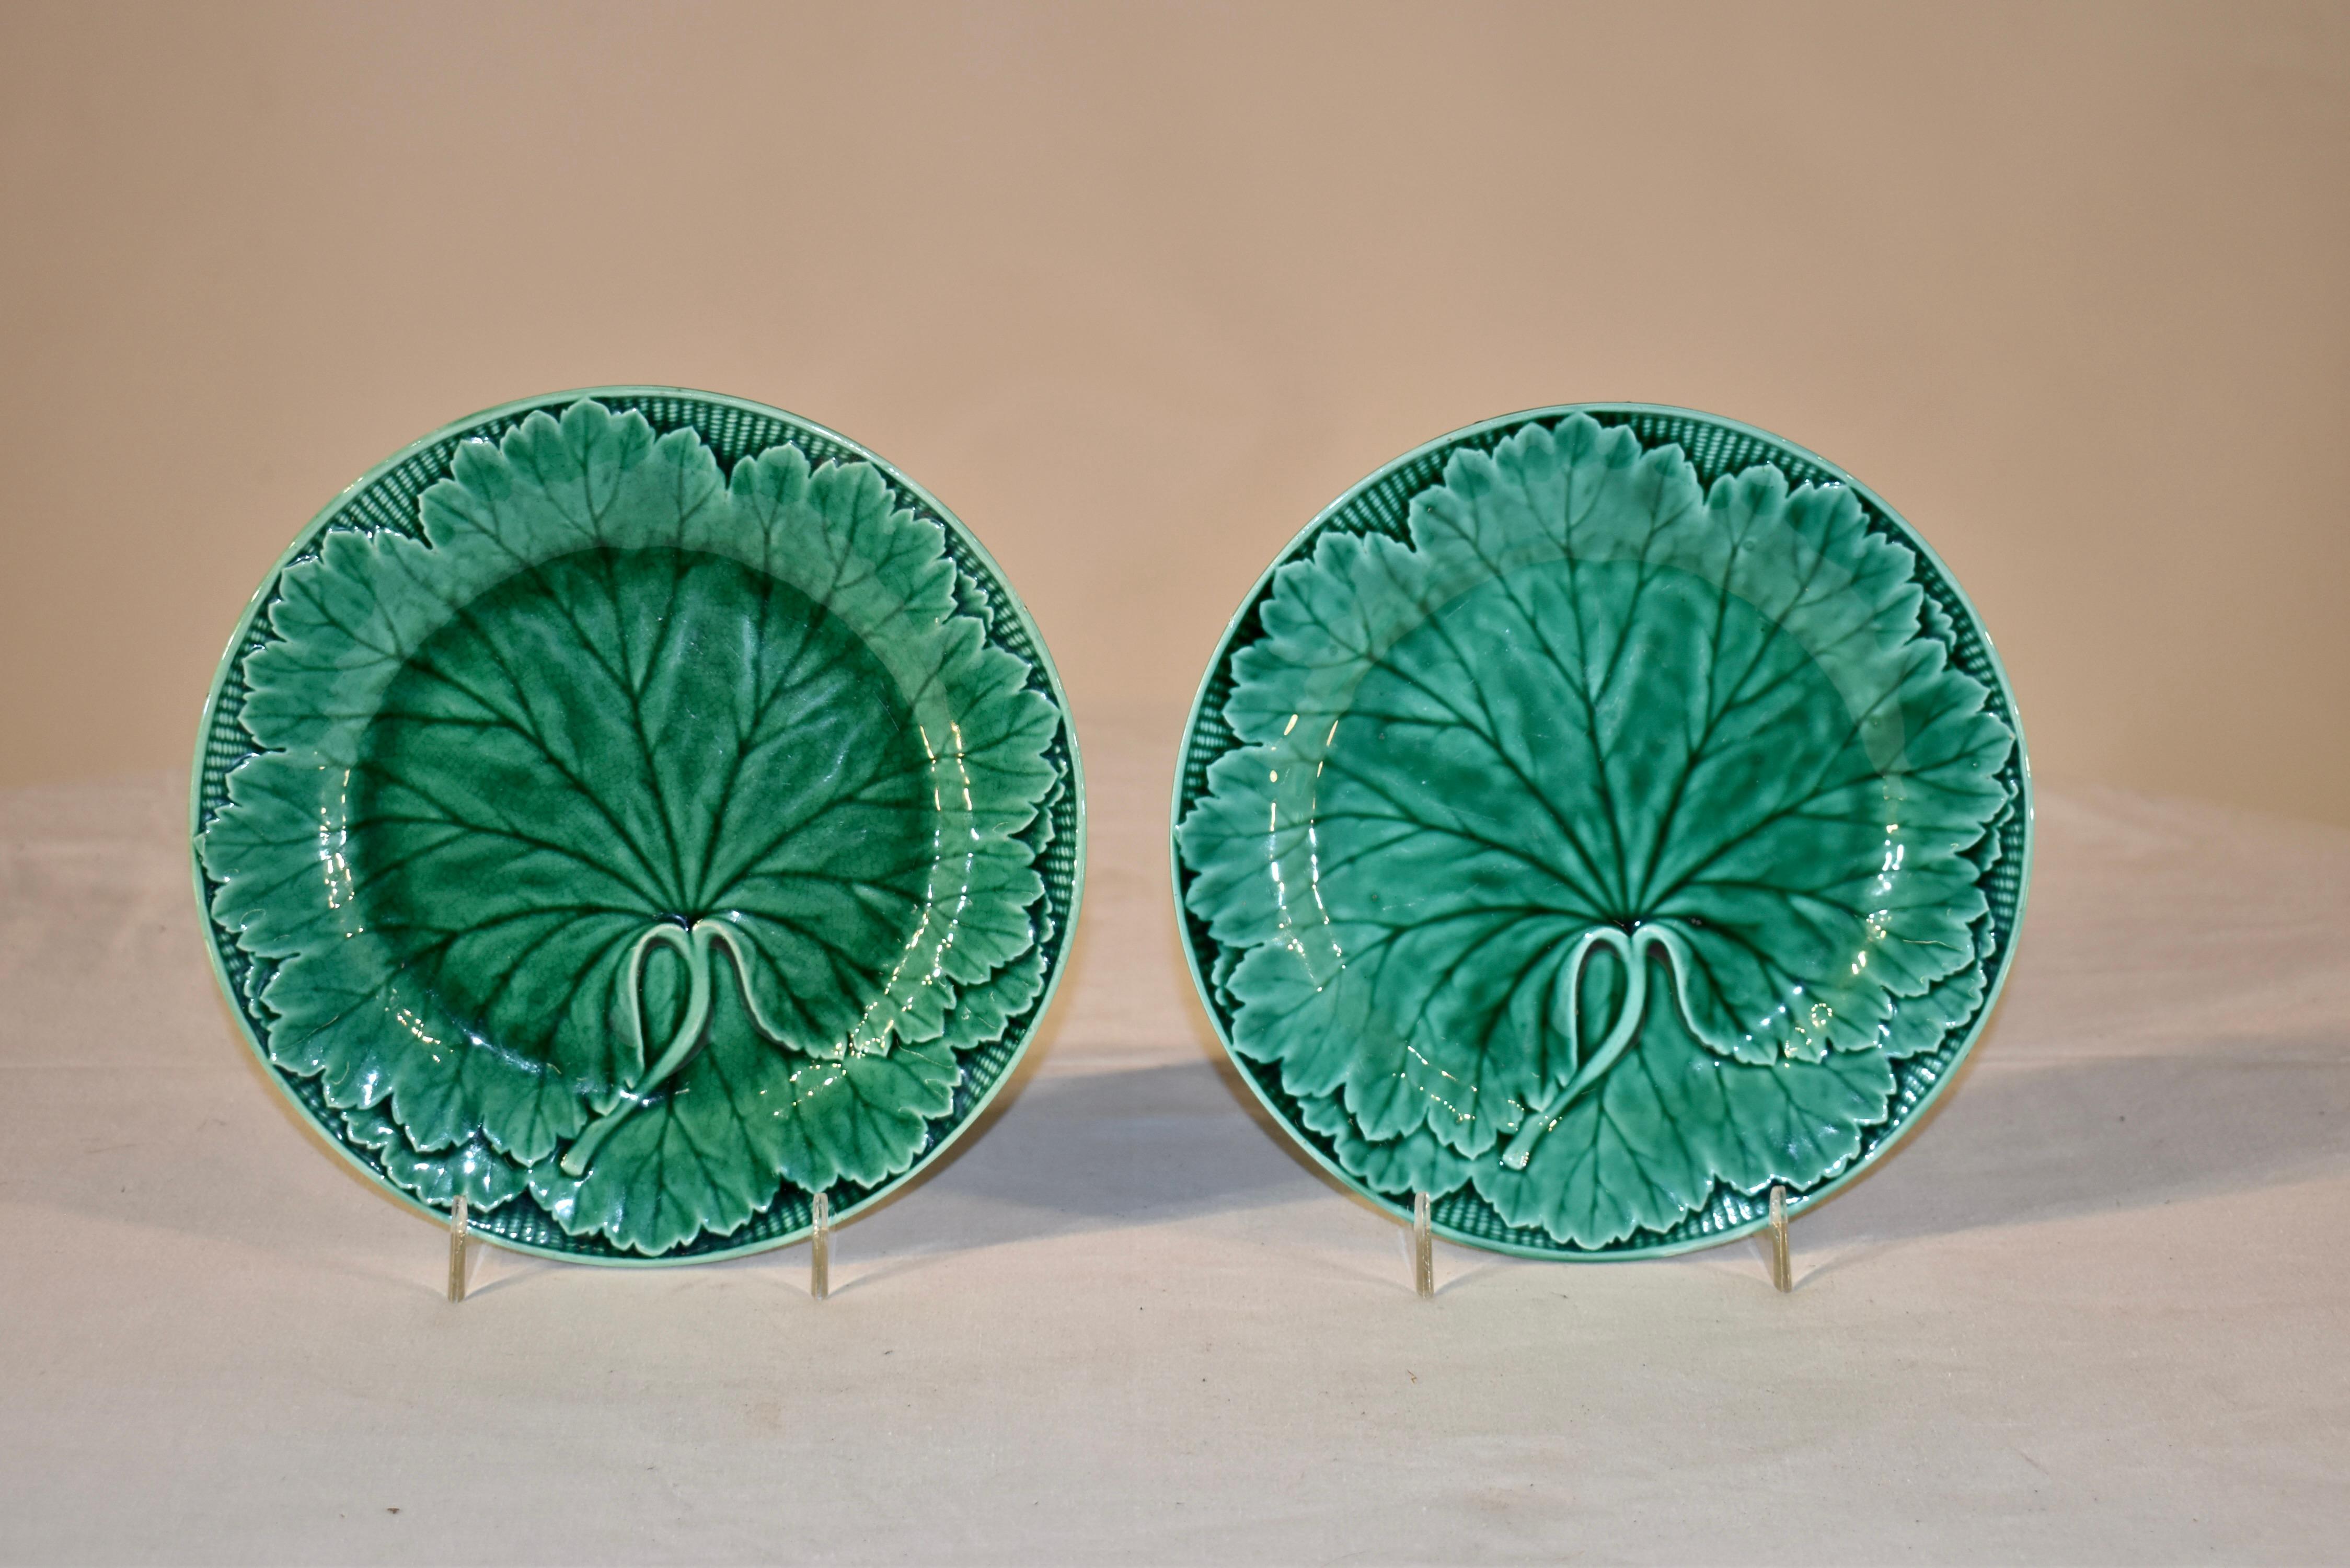 English Pair of 19th Century Wedgwood Majolica Plates For Sale